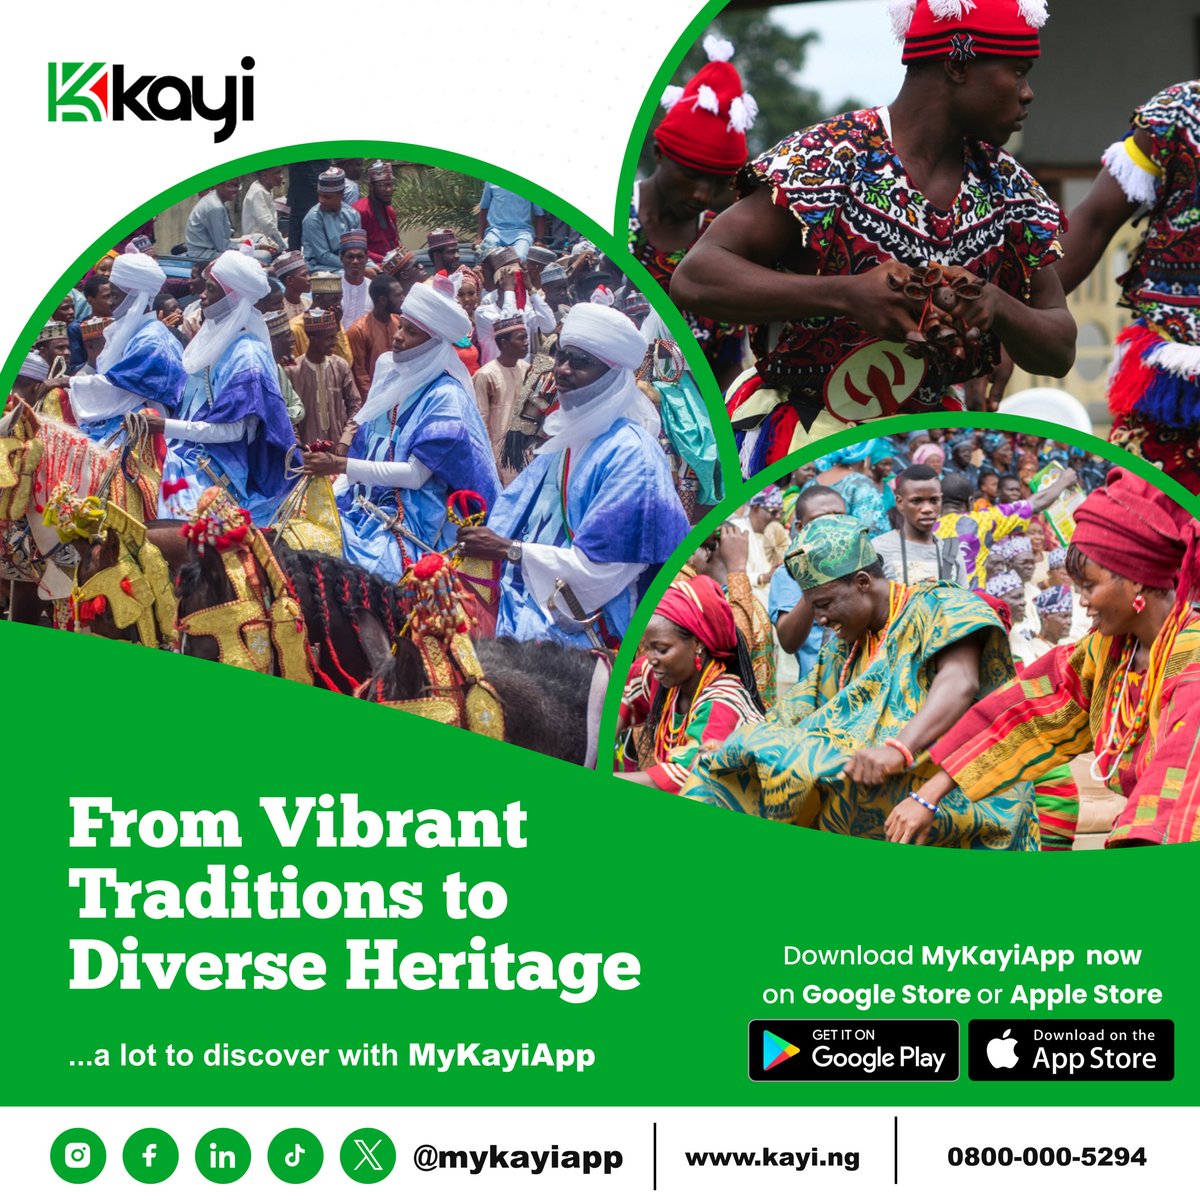 From vibrant traditions to diverse heritage, our roots run deep. Discover more with MyKayiApp.  Download MyKayiApp now on Google Store or Apple Store.

#MyKayiApp #NowLive #Kayiway #DownloadNow #Bankingwithoutlimits #downloadmykayiapp #digitalbanking